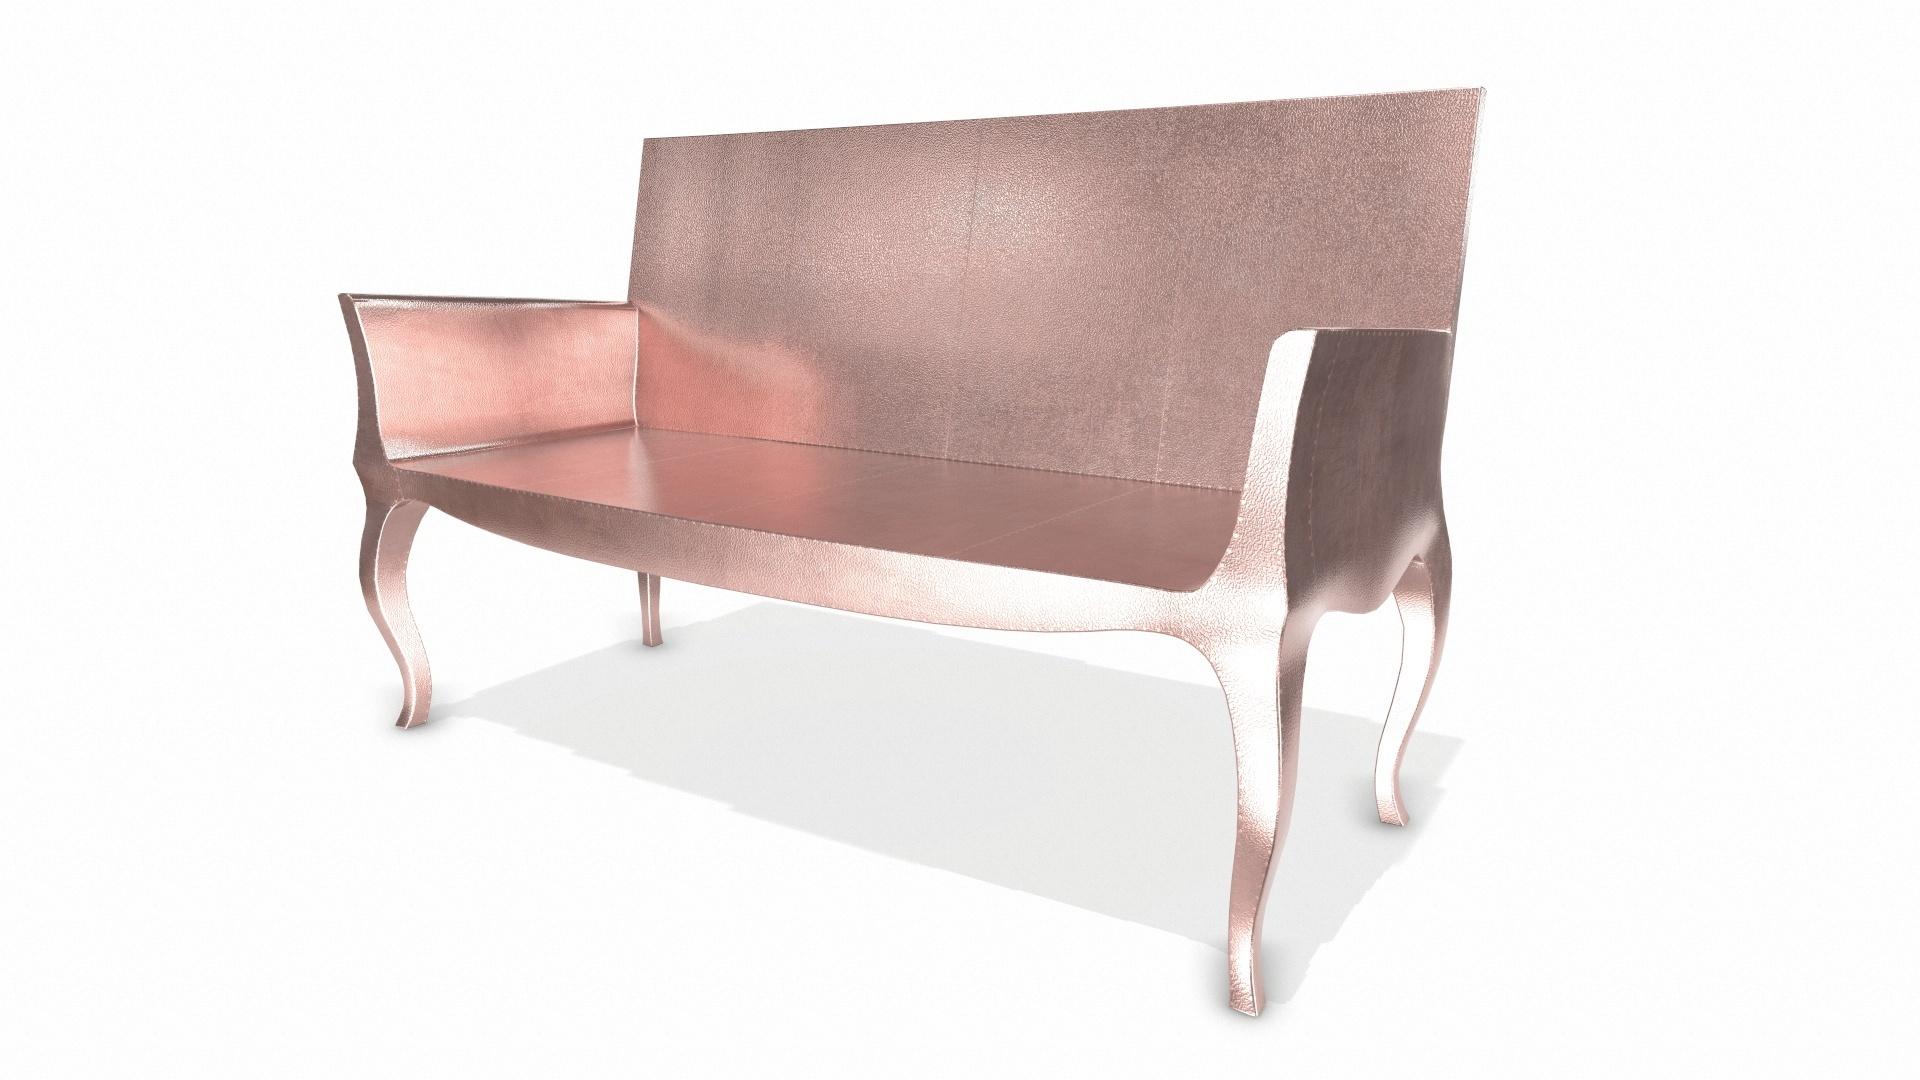 American Louise Settee Art Deco Daybeds in Fine Hammered Copper by Paul Mathieu For Sale